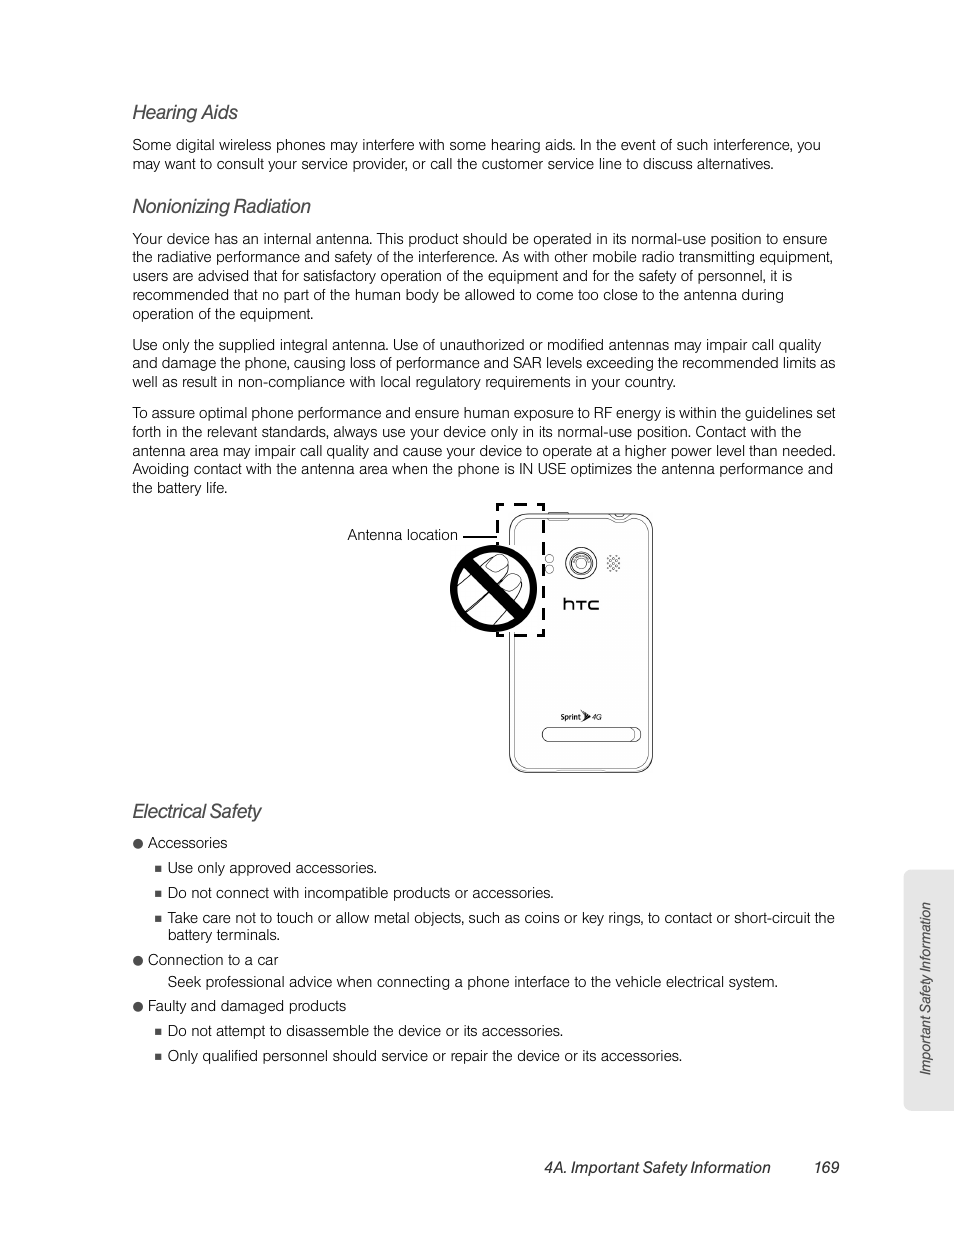 Hearing aids, Nonionizing radiation, Electrical safety | HTC EVO 4G User Manual | Page 179 / 197